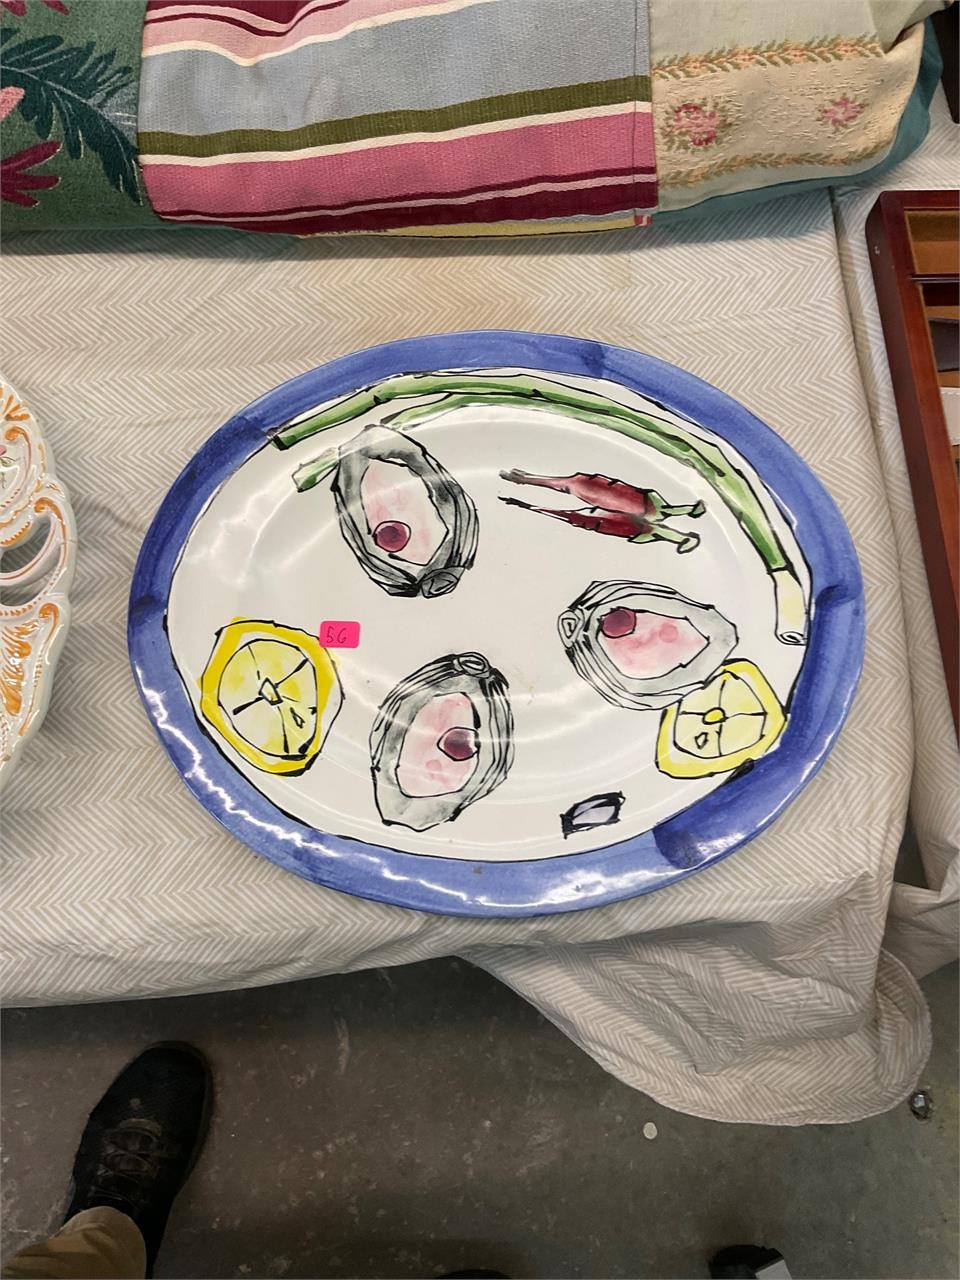 Decorative SIGNED Oyster Serving Plate